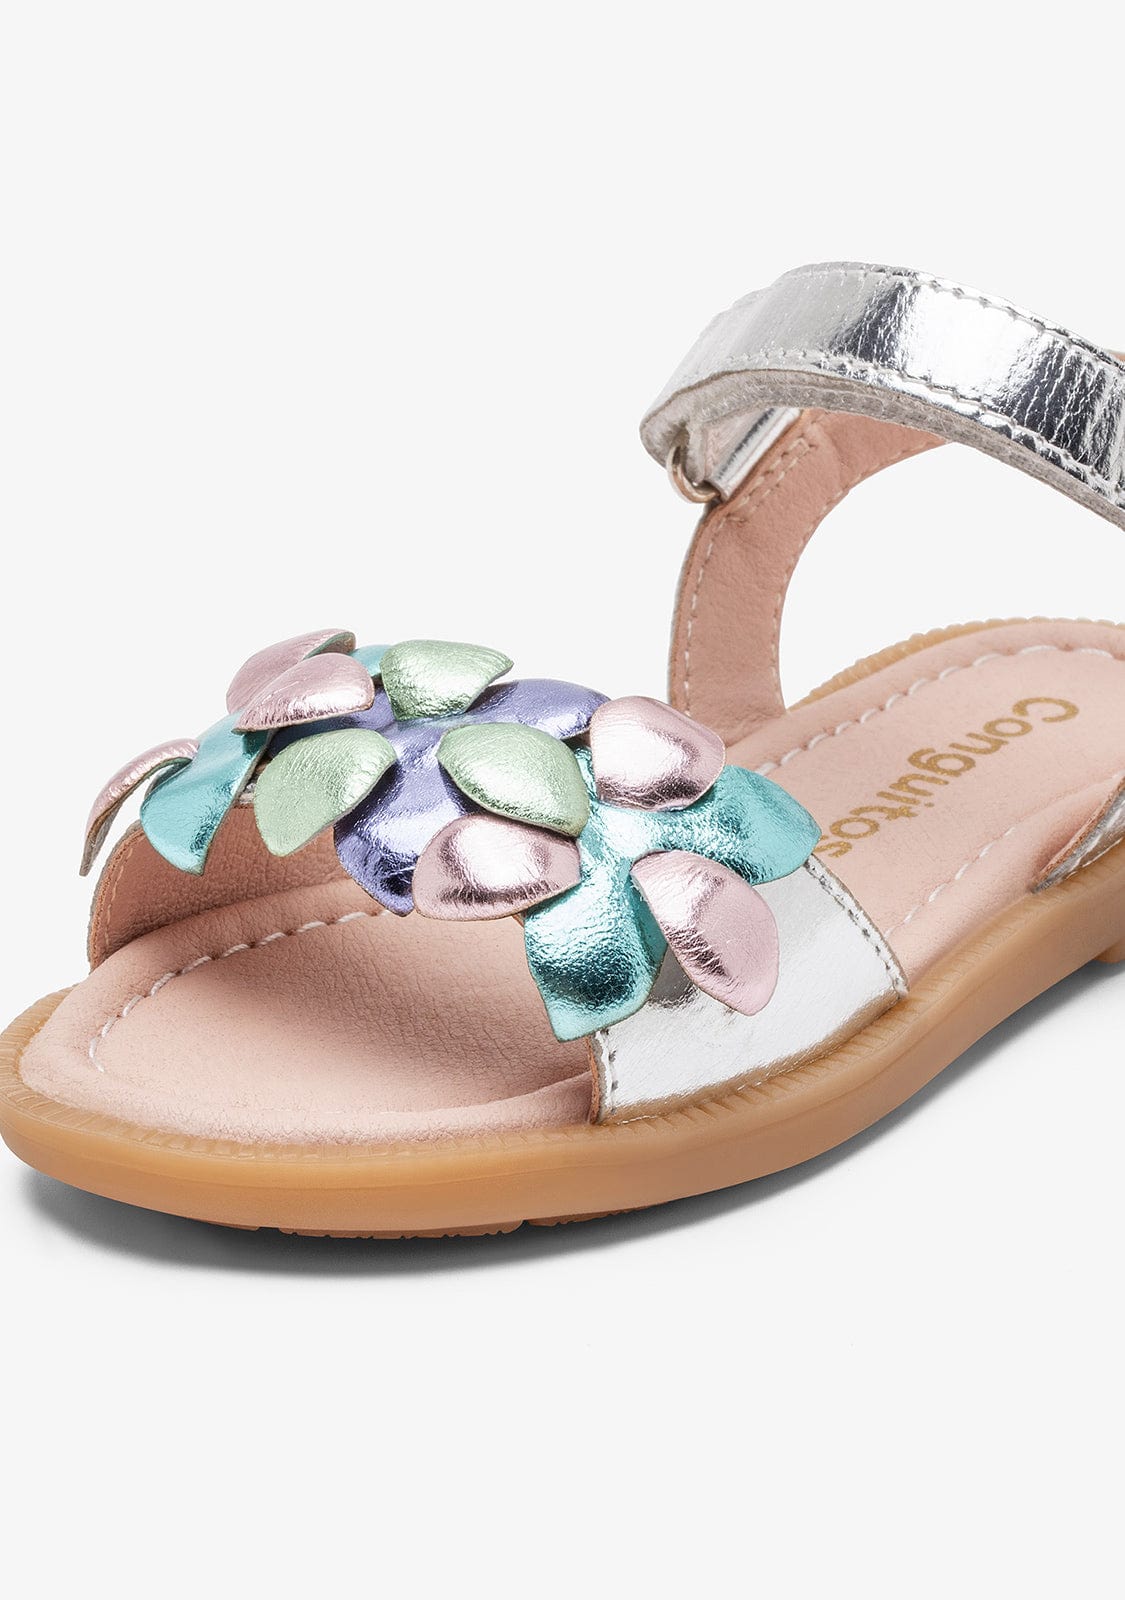 CONGUITOS Shoes Girl's Flowers Multi Leather Sandals